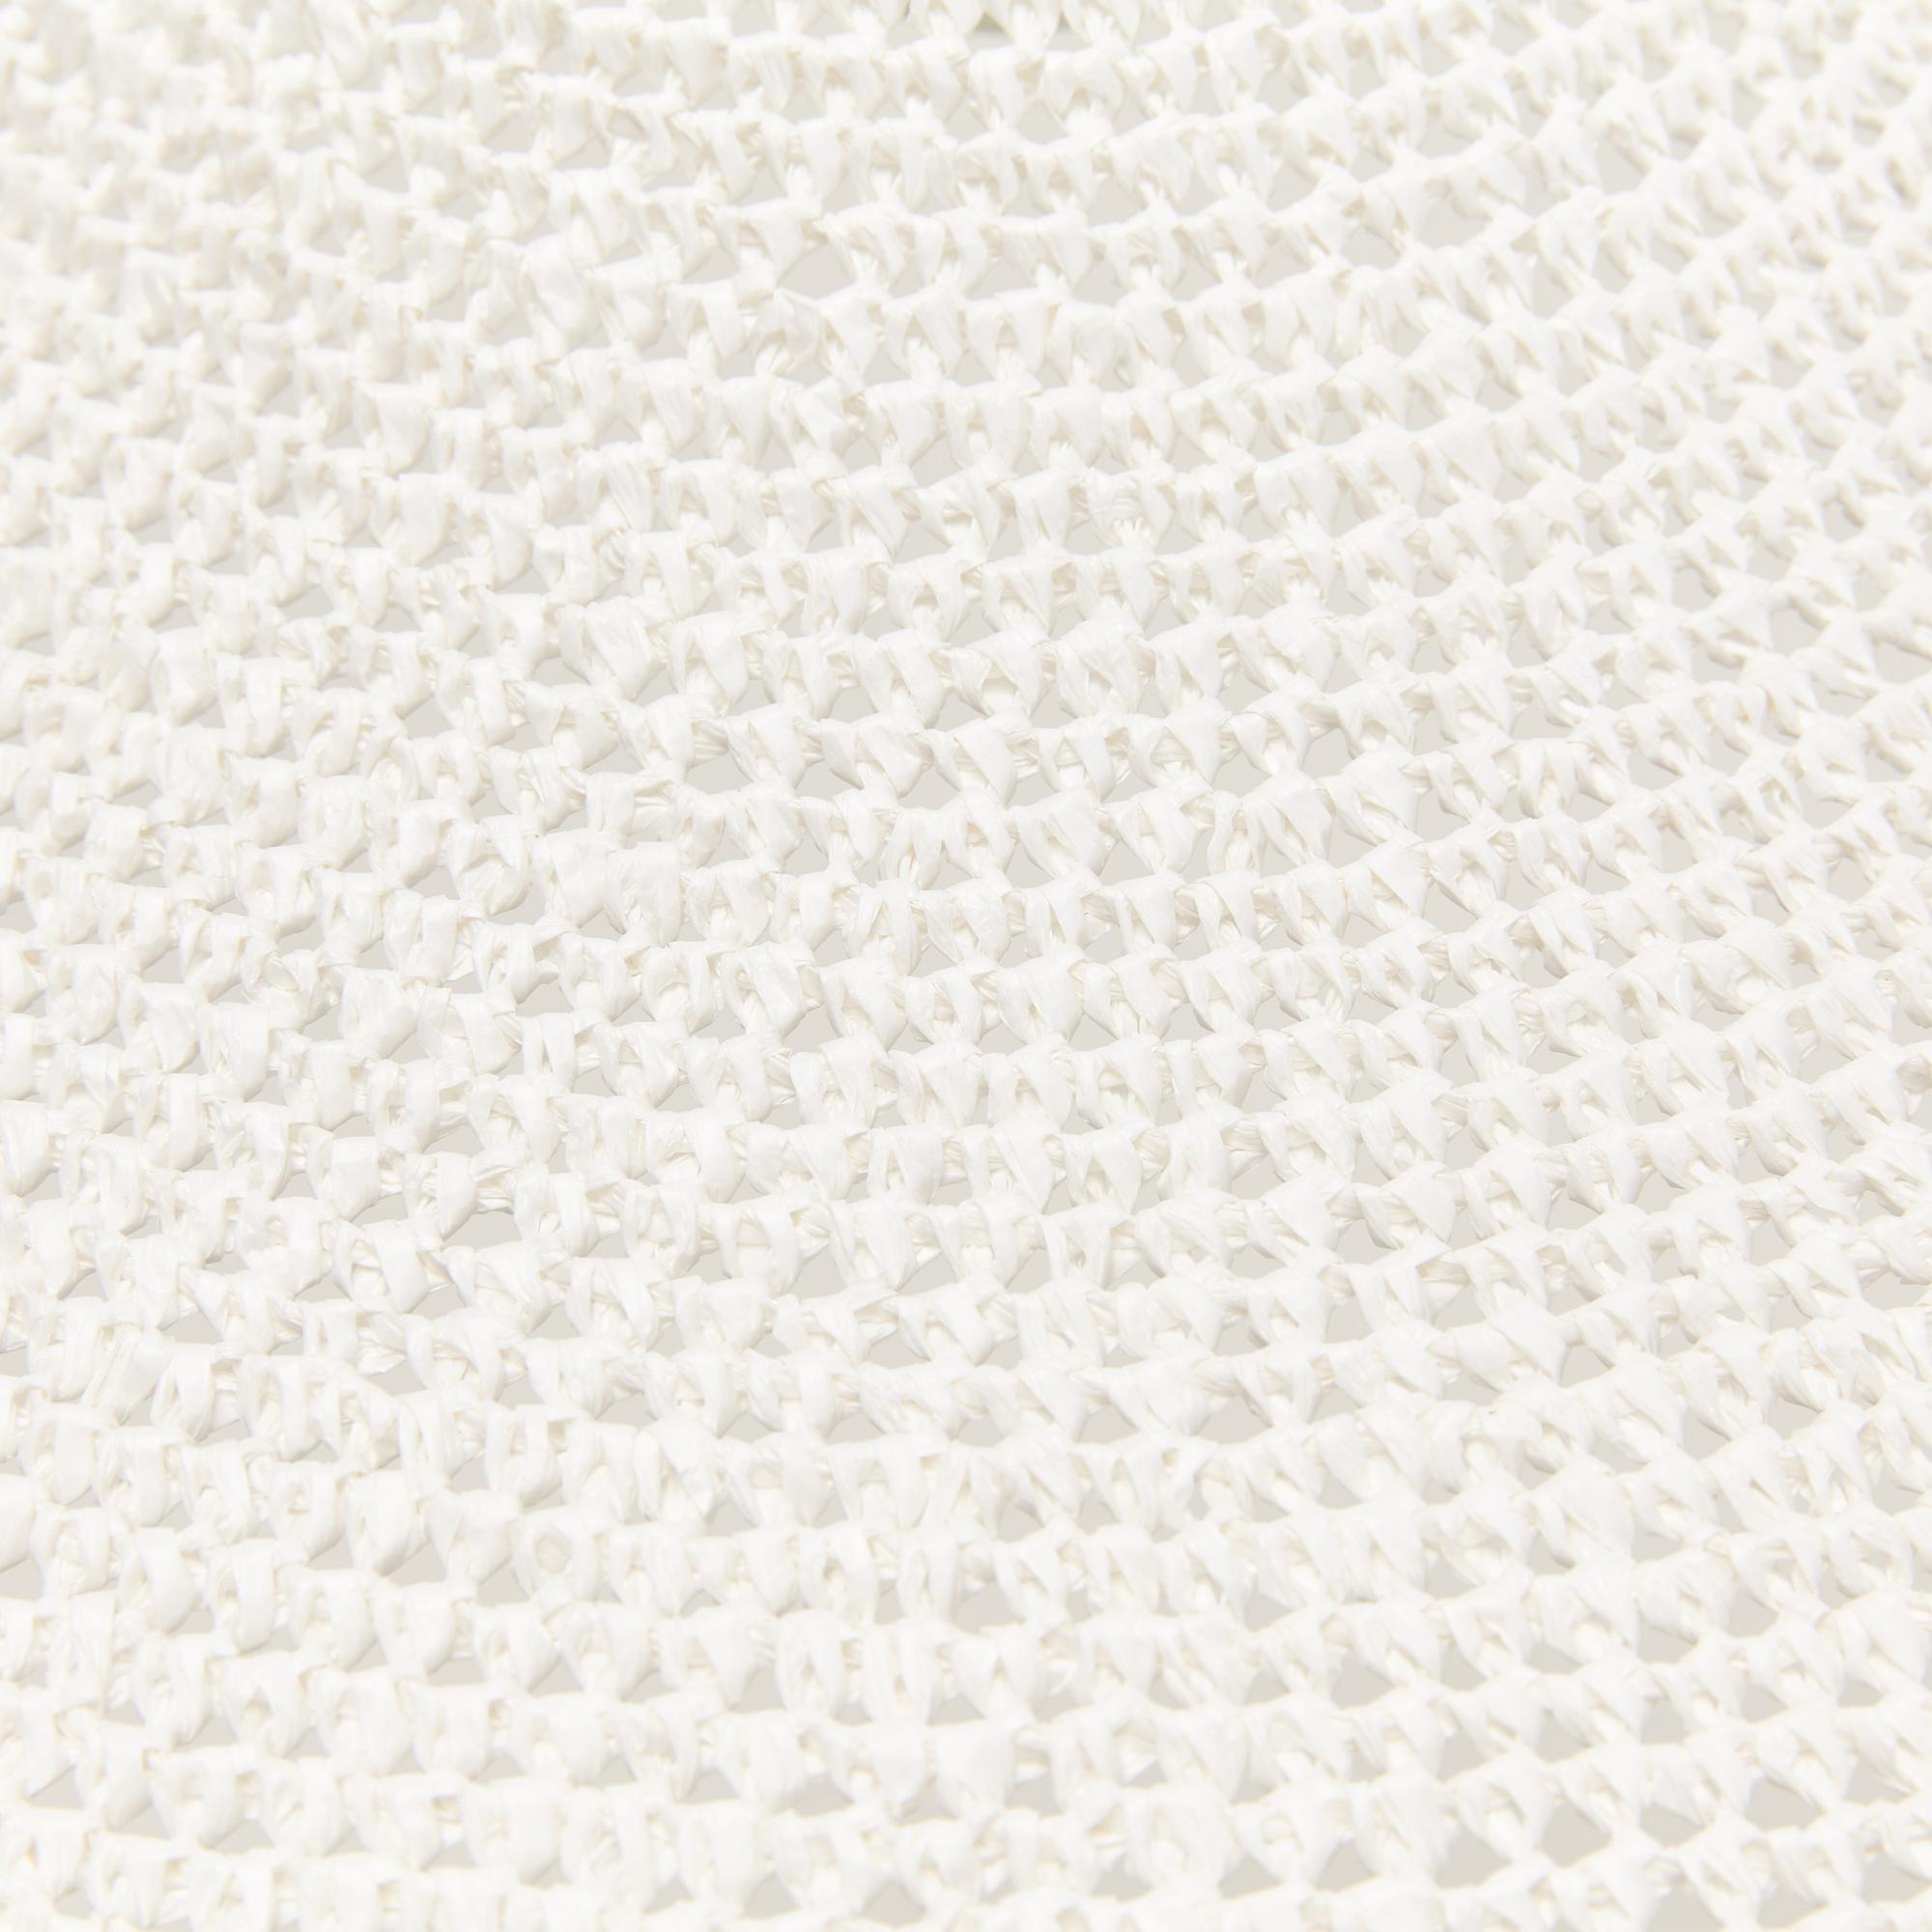 SS01 Pendant Light Ø80cm/31.5in, Hand Crocheted in 100% Egyptian Cotton In New Condition For Sale In London, London